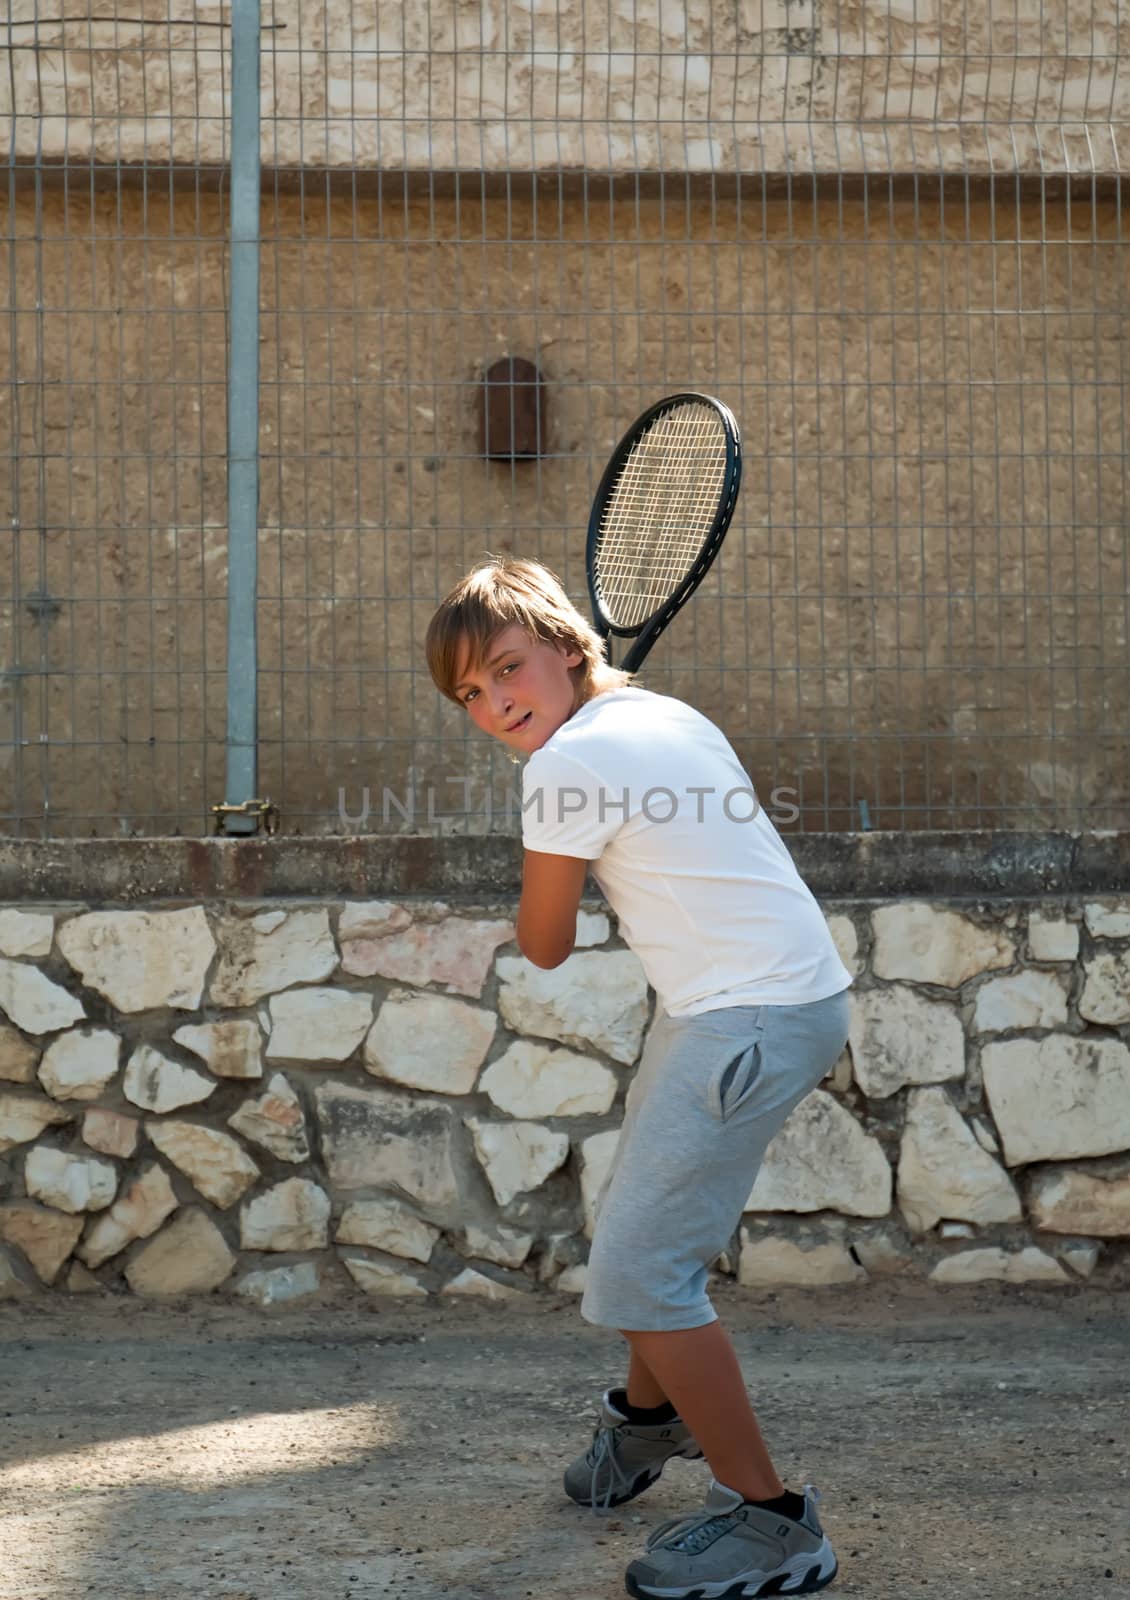 Young boy with tennis racket . by LarisaP